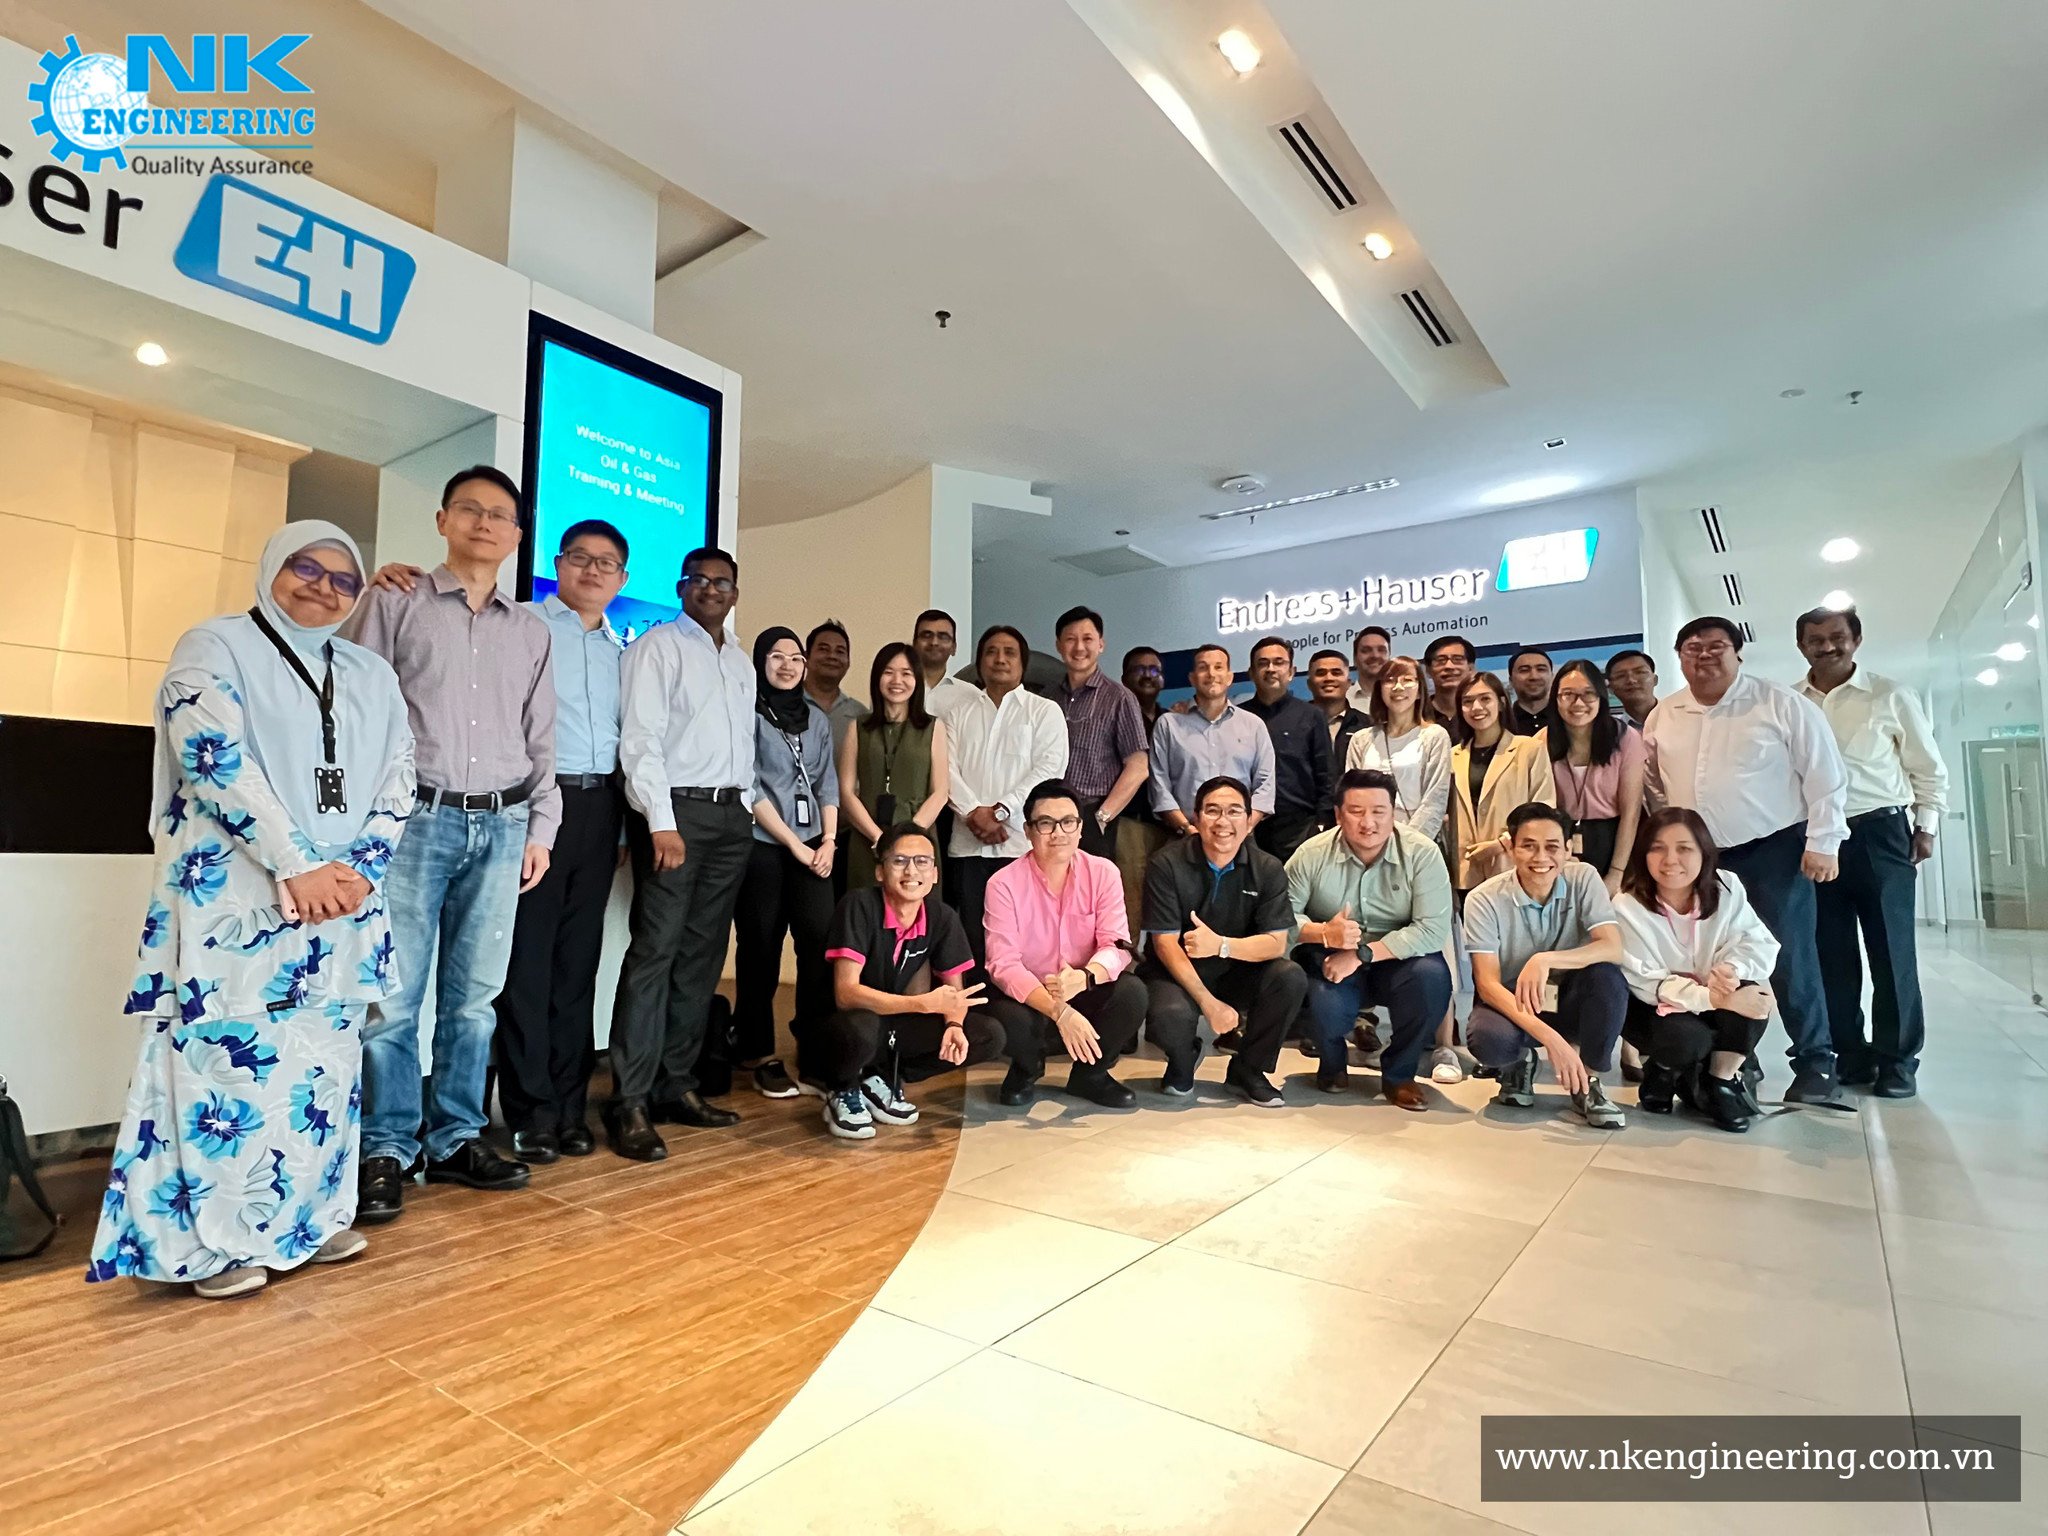 O&G Training and Asian Network Meeting at the E+H Malaysia office